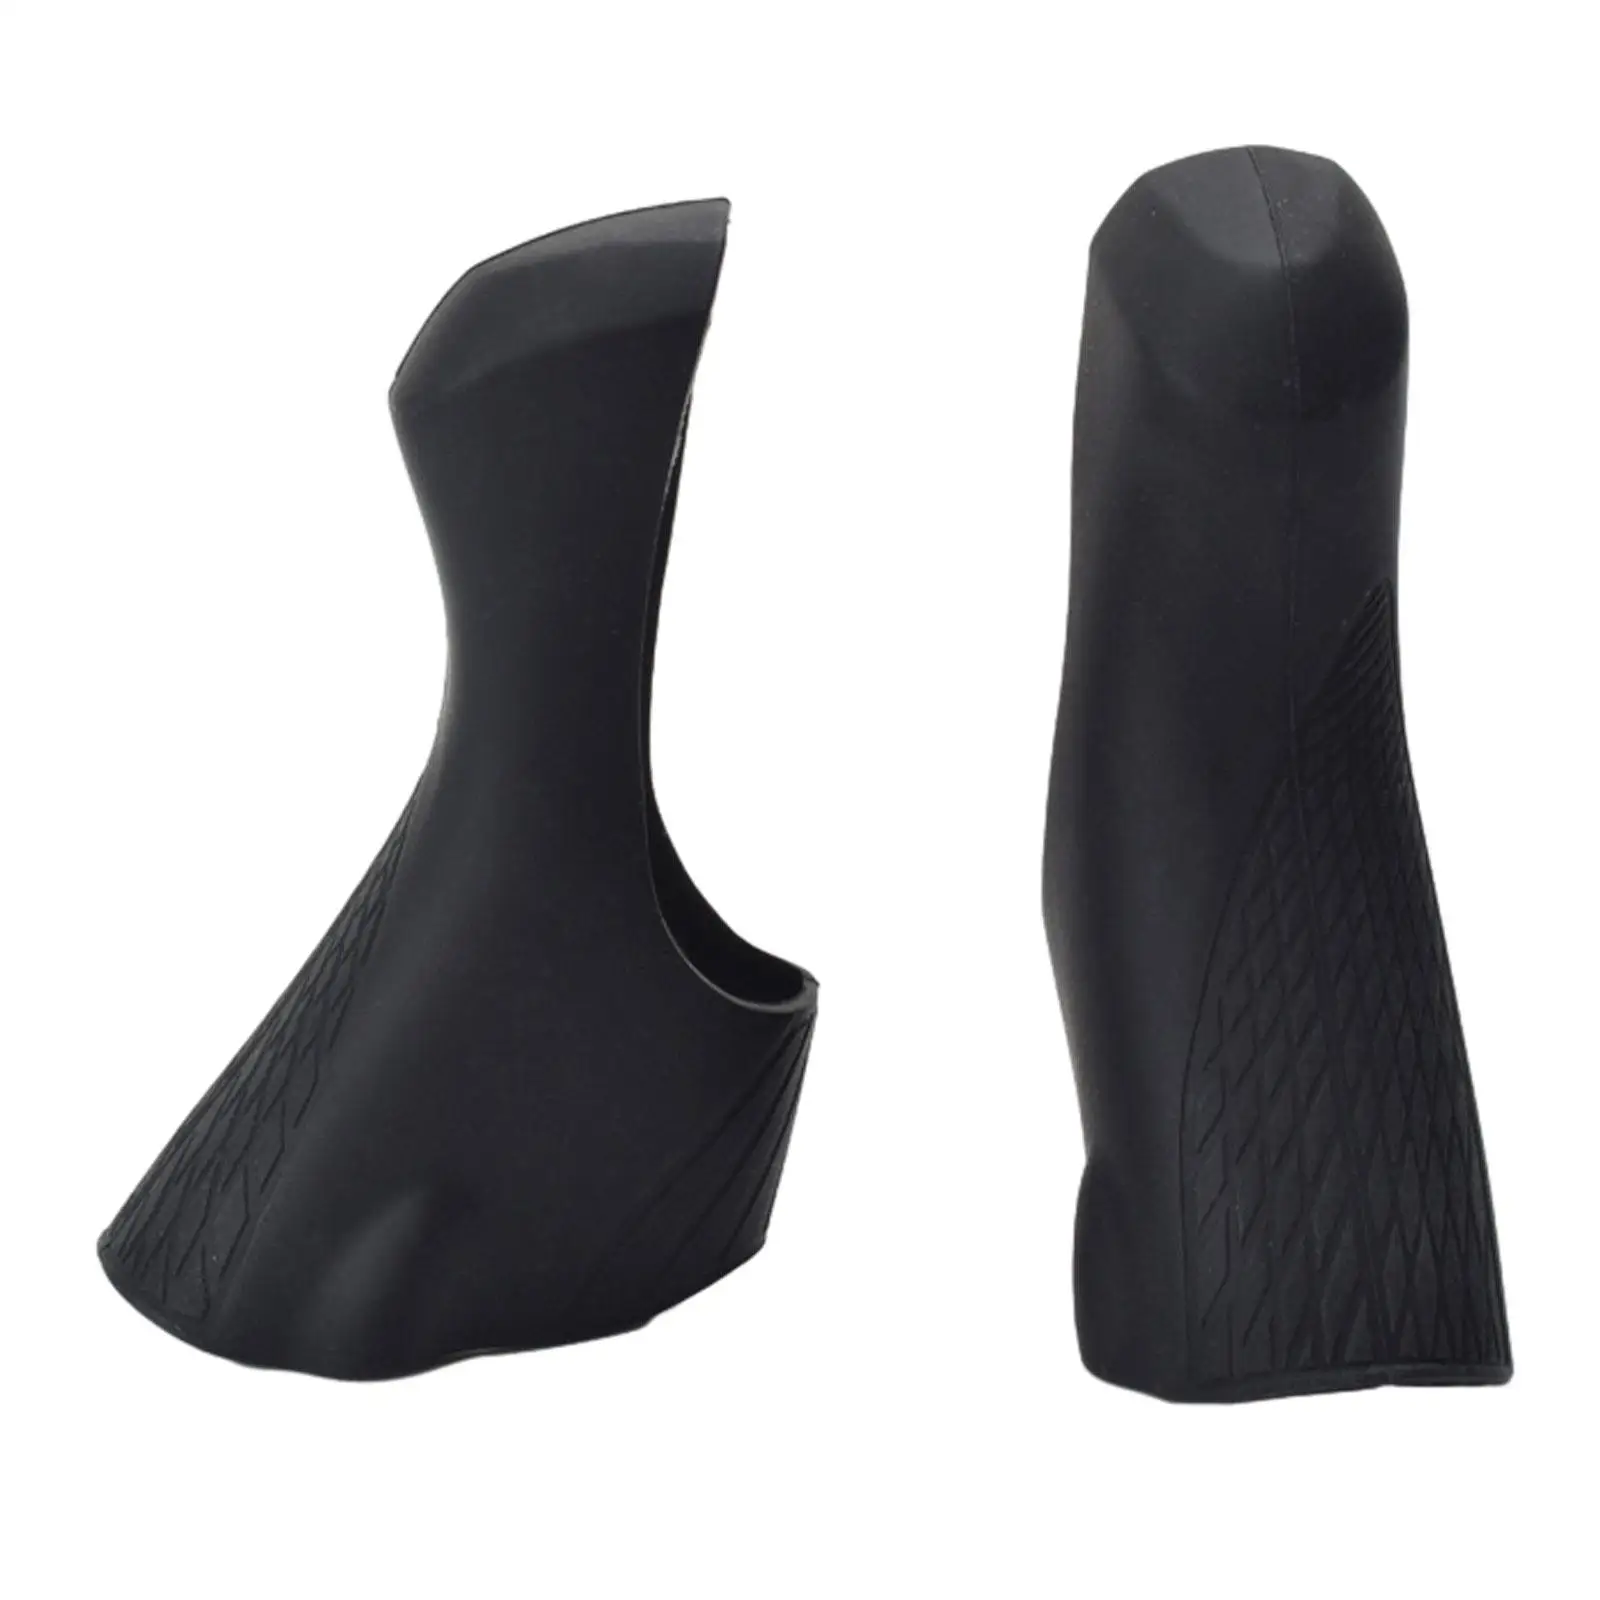 Bike Shifter Lever Cover, Road Bicycle Shifters Silicone Cover for Shifter Brake Lever Hood Cover